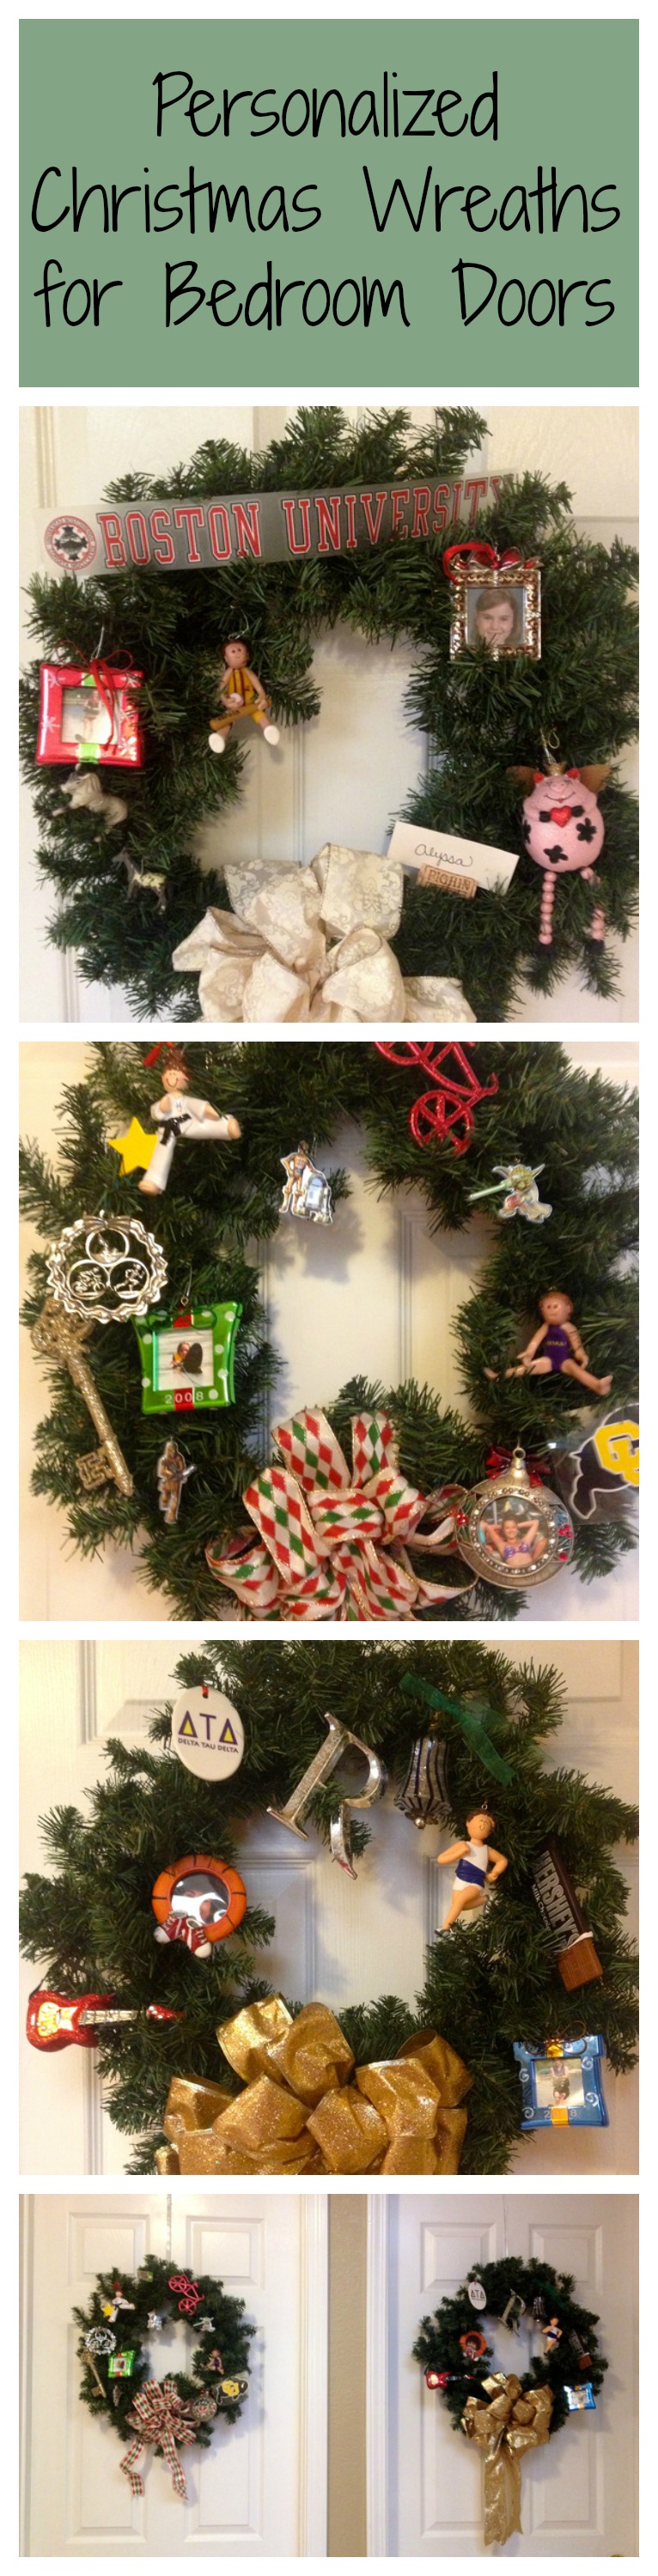 Personalized Christmas Wreaths for Bedroom Doors - Creating new traditions in our blended family